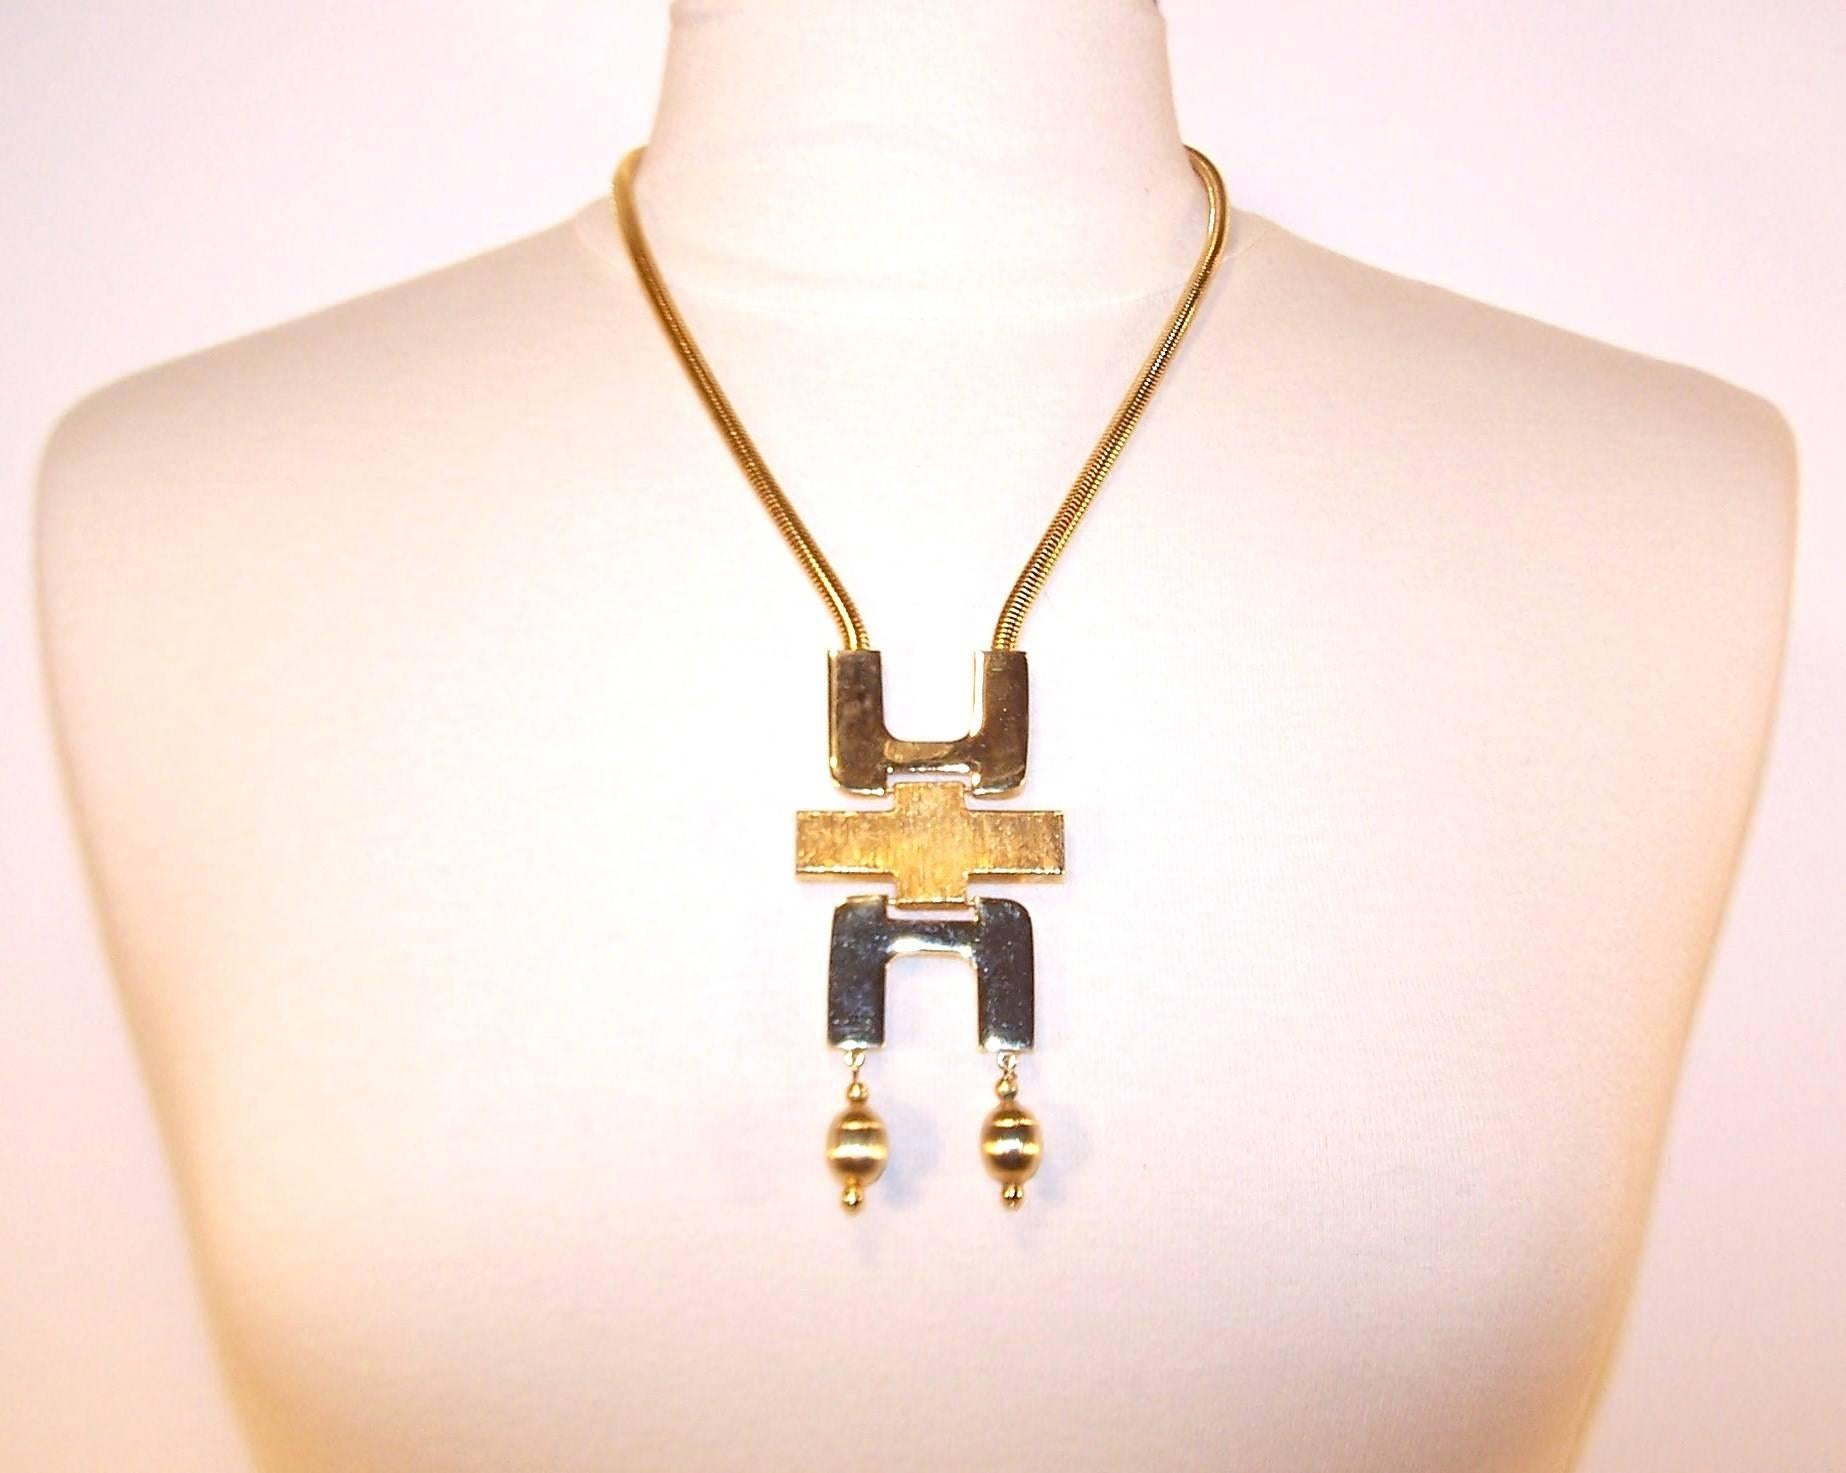 This 1970's Tortolani gold plated necklace is a period perfect mod accessory for a modern wardrobe.  The articulated modernist pendant is suspended from a quality snake style chain with an adjustable hook closure.  The combination of polished and